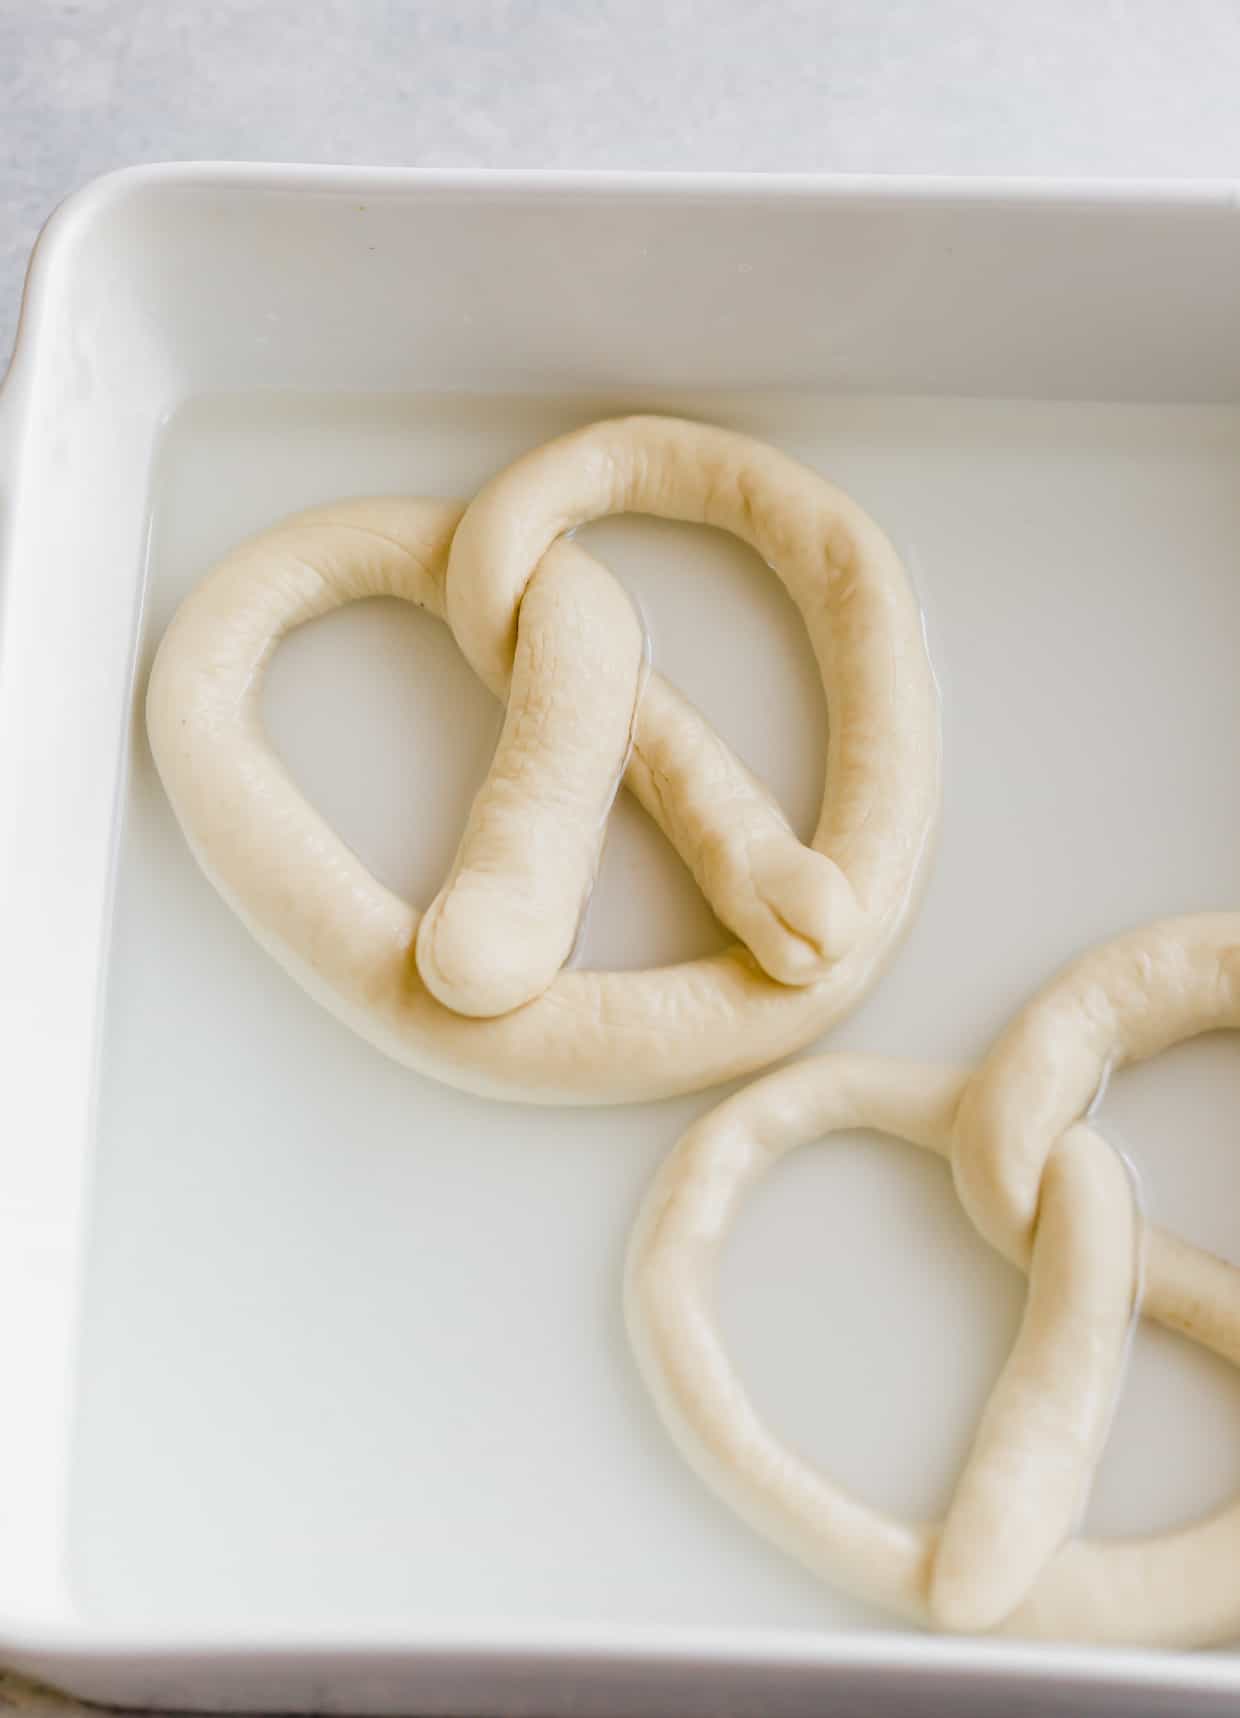 An unbaked pretzel in a baking soda and water bath.